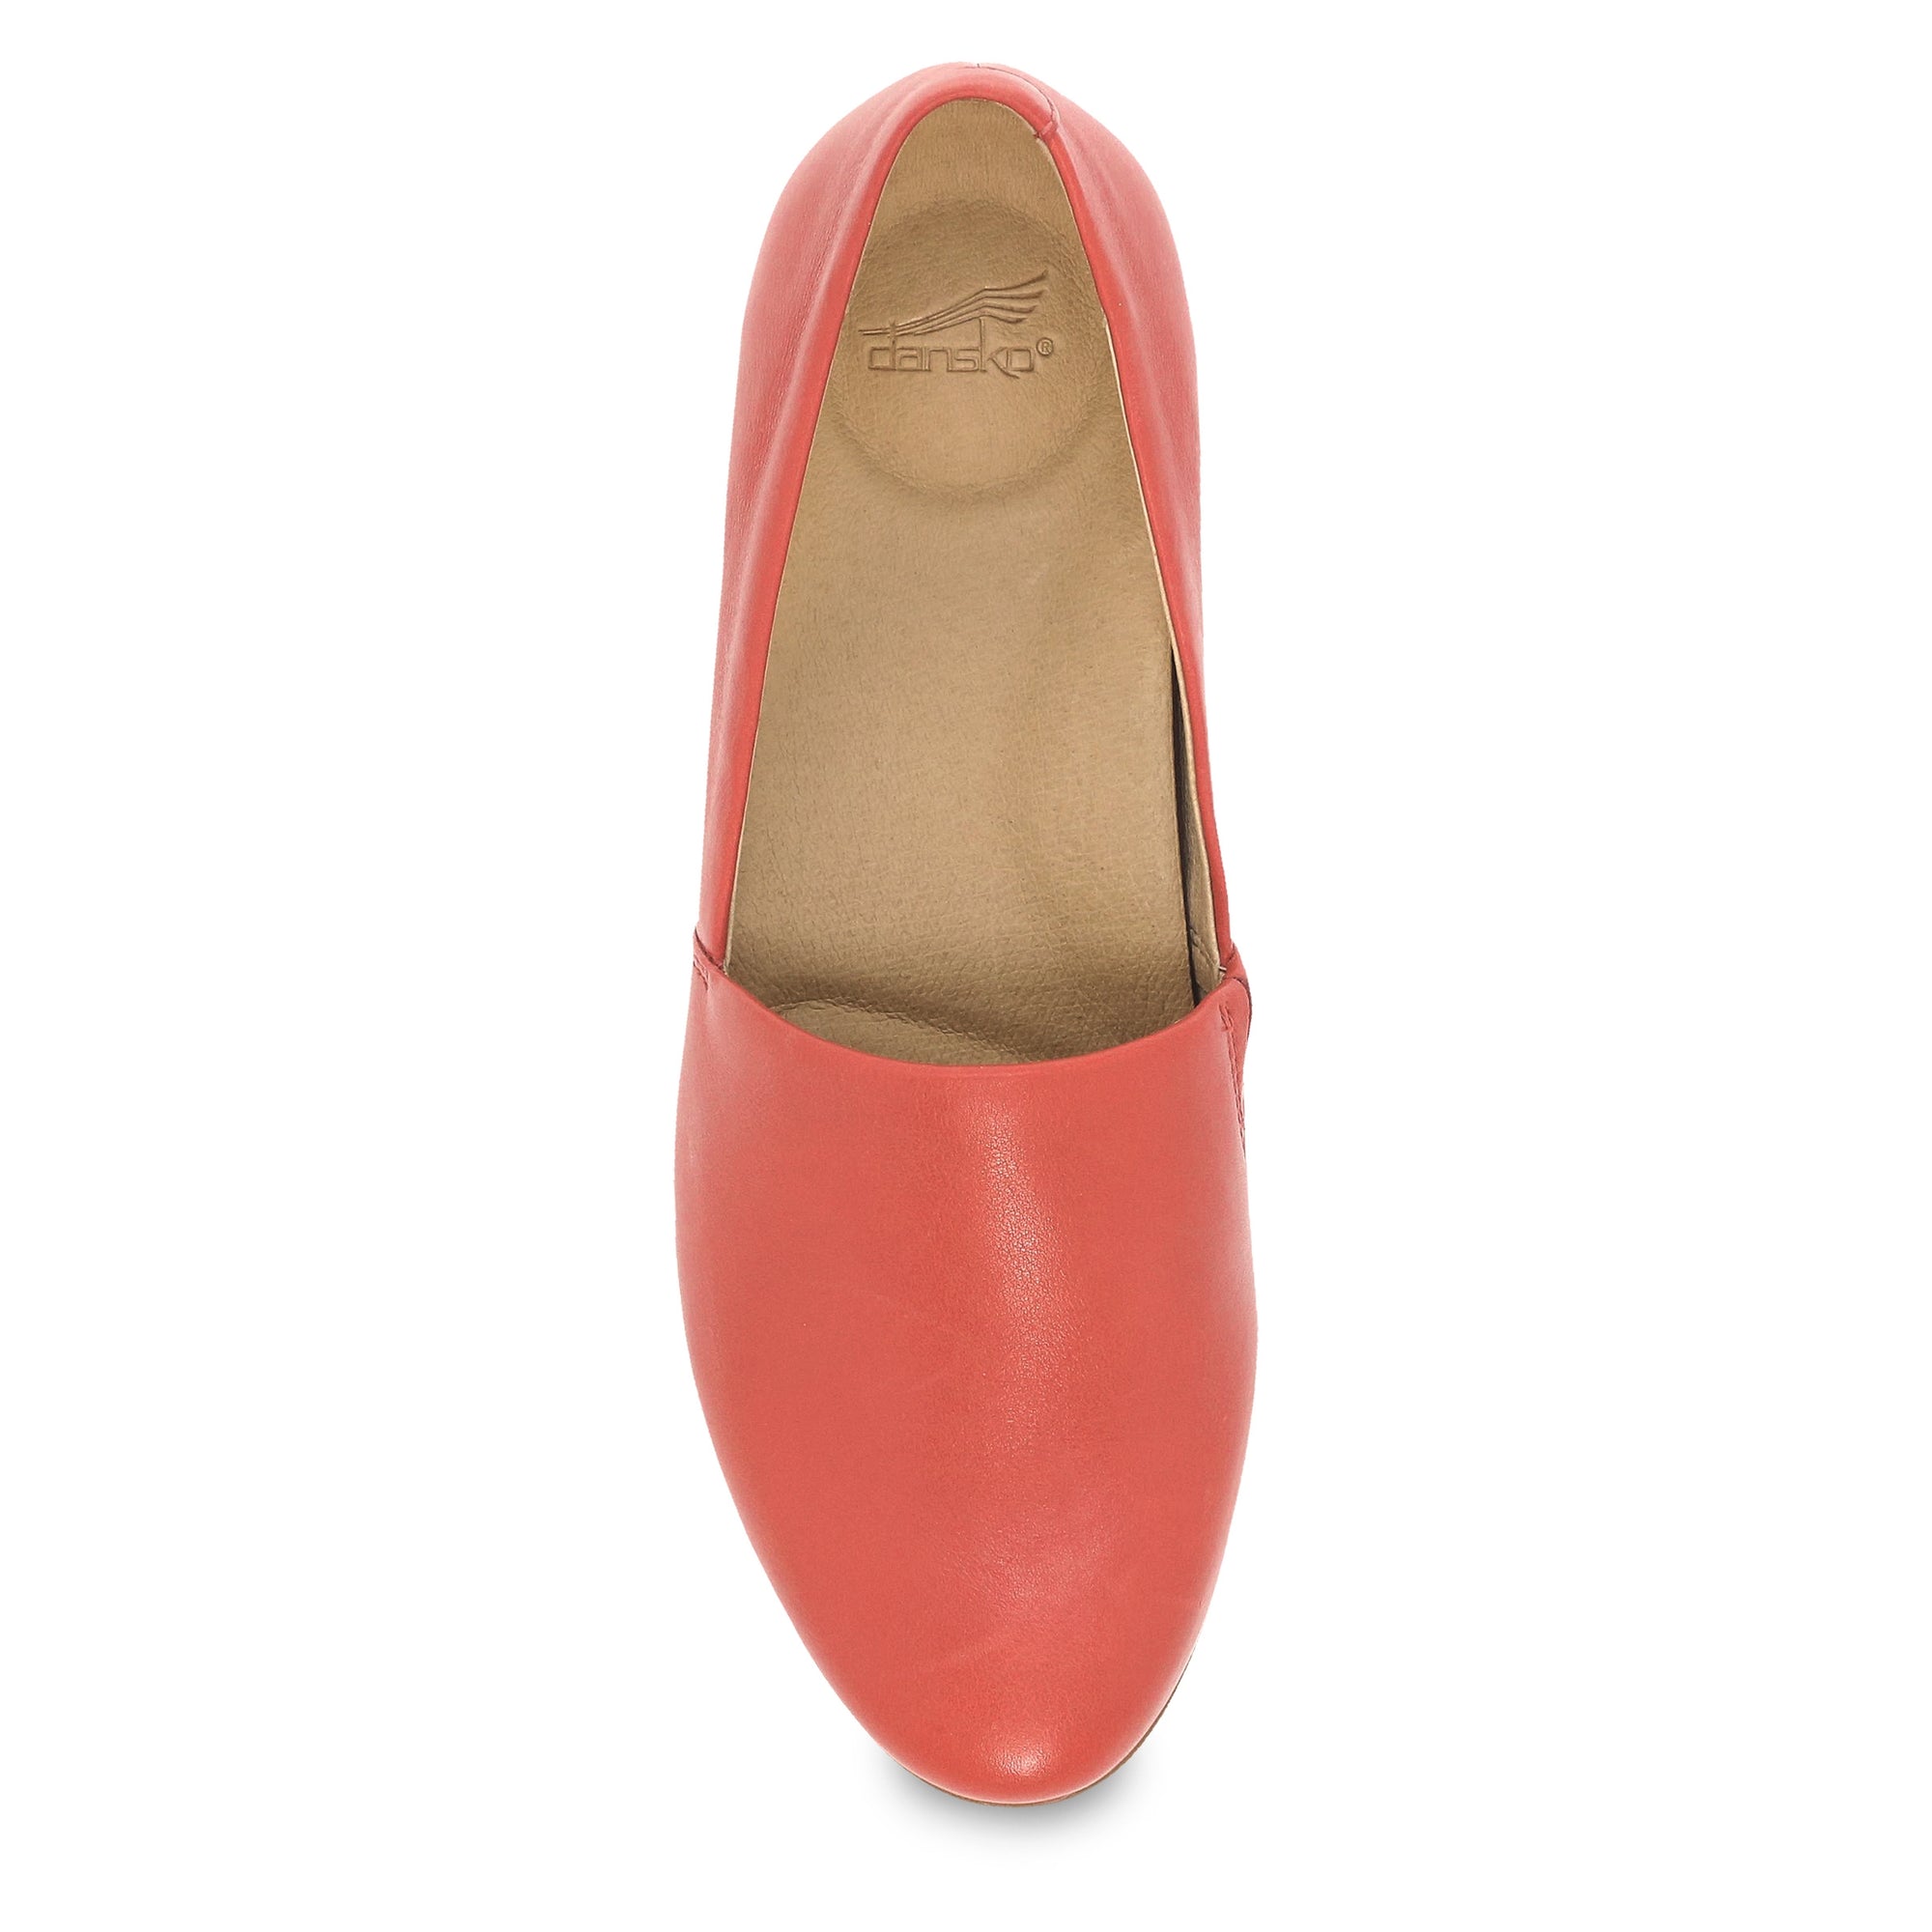 Top view of a red leather flat, showing a contoured footbed.